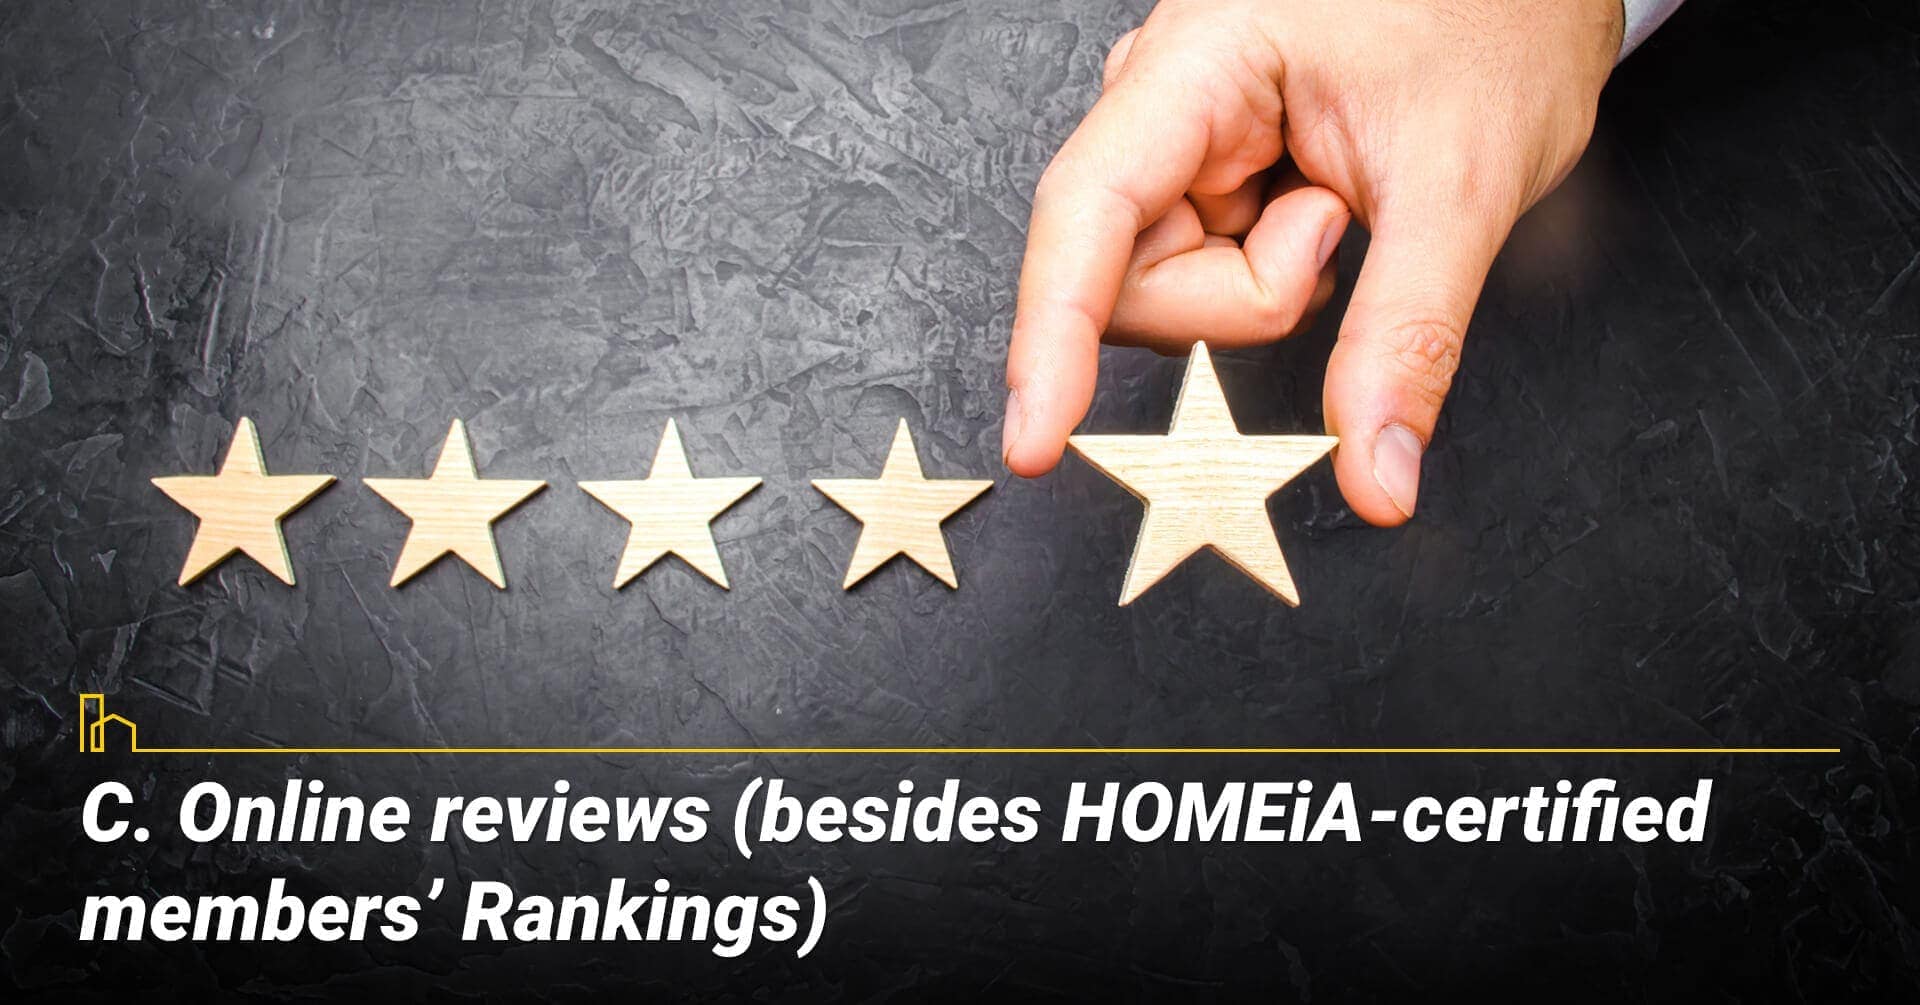 Online reviews (besides HOMEiA-certified members' Rankings), look for input from others